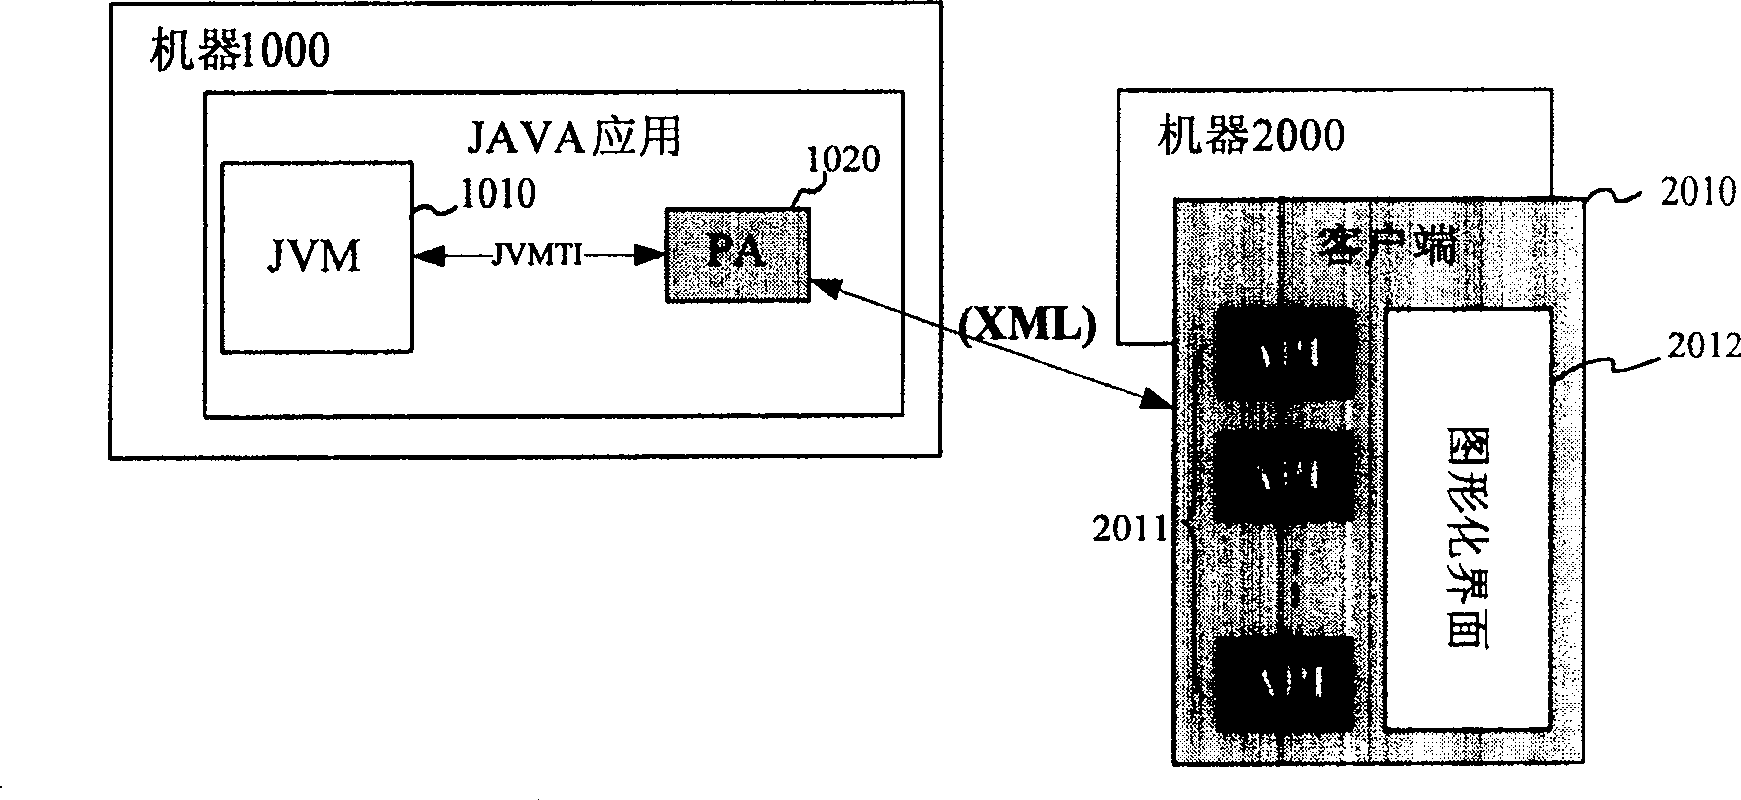 Diagnostic system in use for Java application